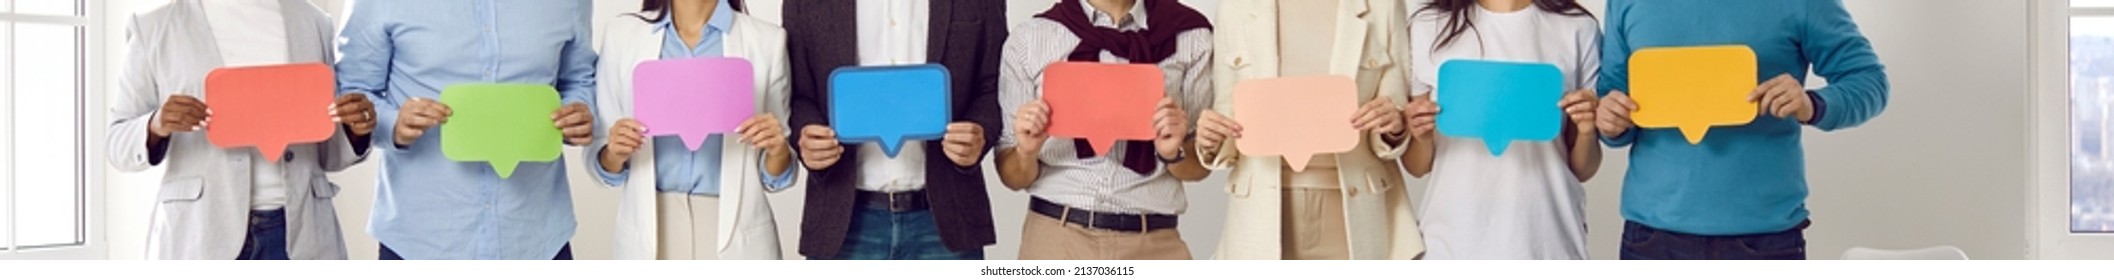 Group of people holding colorful message bubbles. Team of entrepreneurs with red, green, purple, blue, yellow mock up speech balloons sharing different opinions. Cropped shot. Banner header background - Shutterstock ID 2137036115